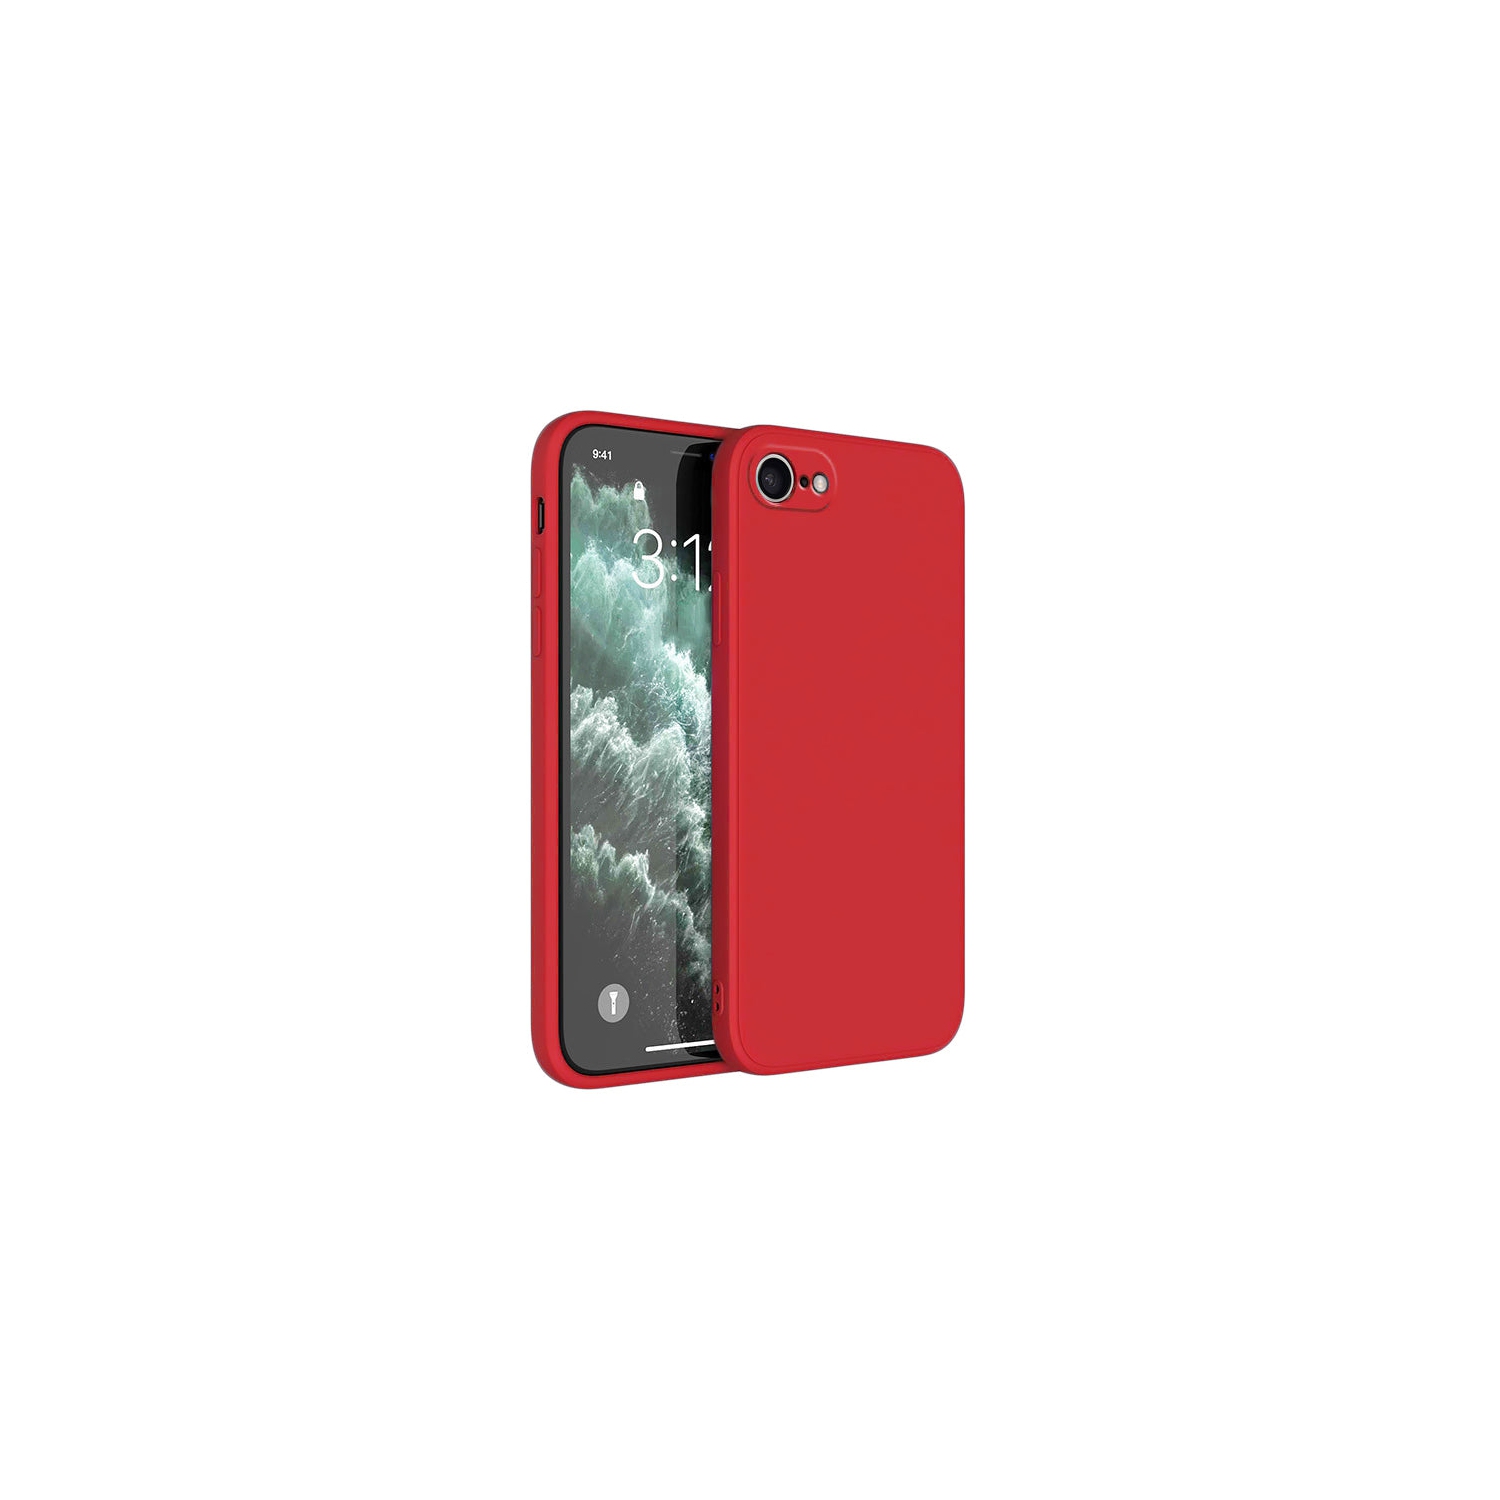 PANDACO Soft Shell Matte Red Case for iPhone 6 or iPhone 6S